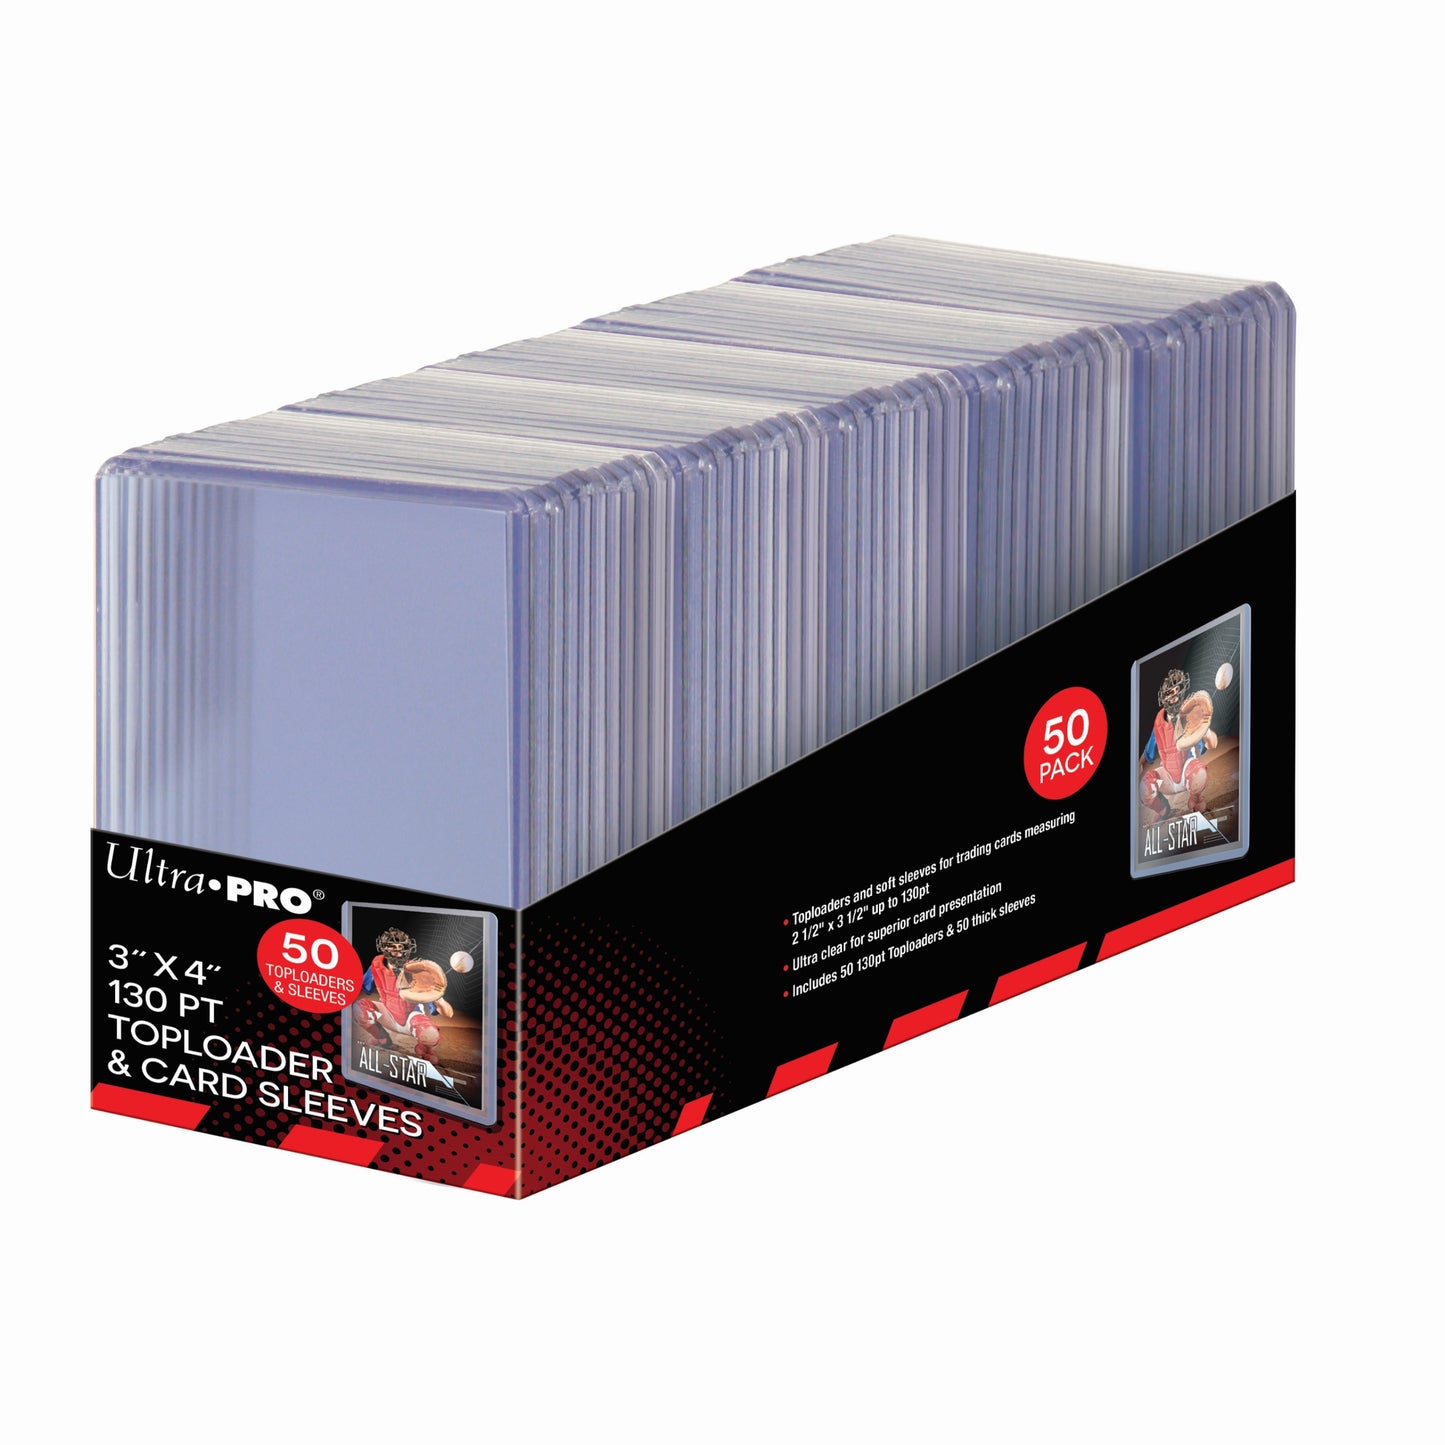 50 ct. Ultra Pro 3" X 4" Super Thick 130PT Toploaders with Thick Card Sleeves